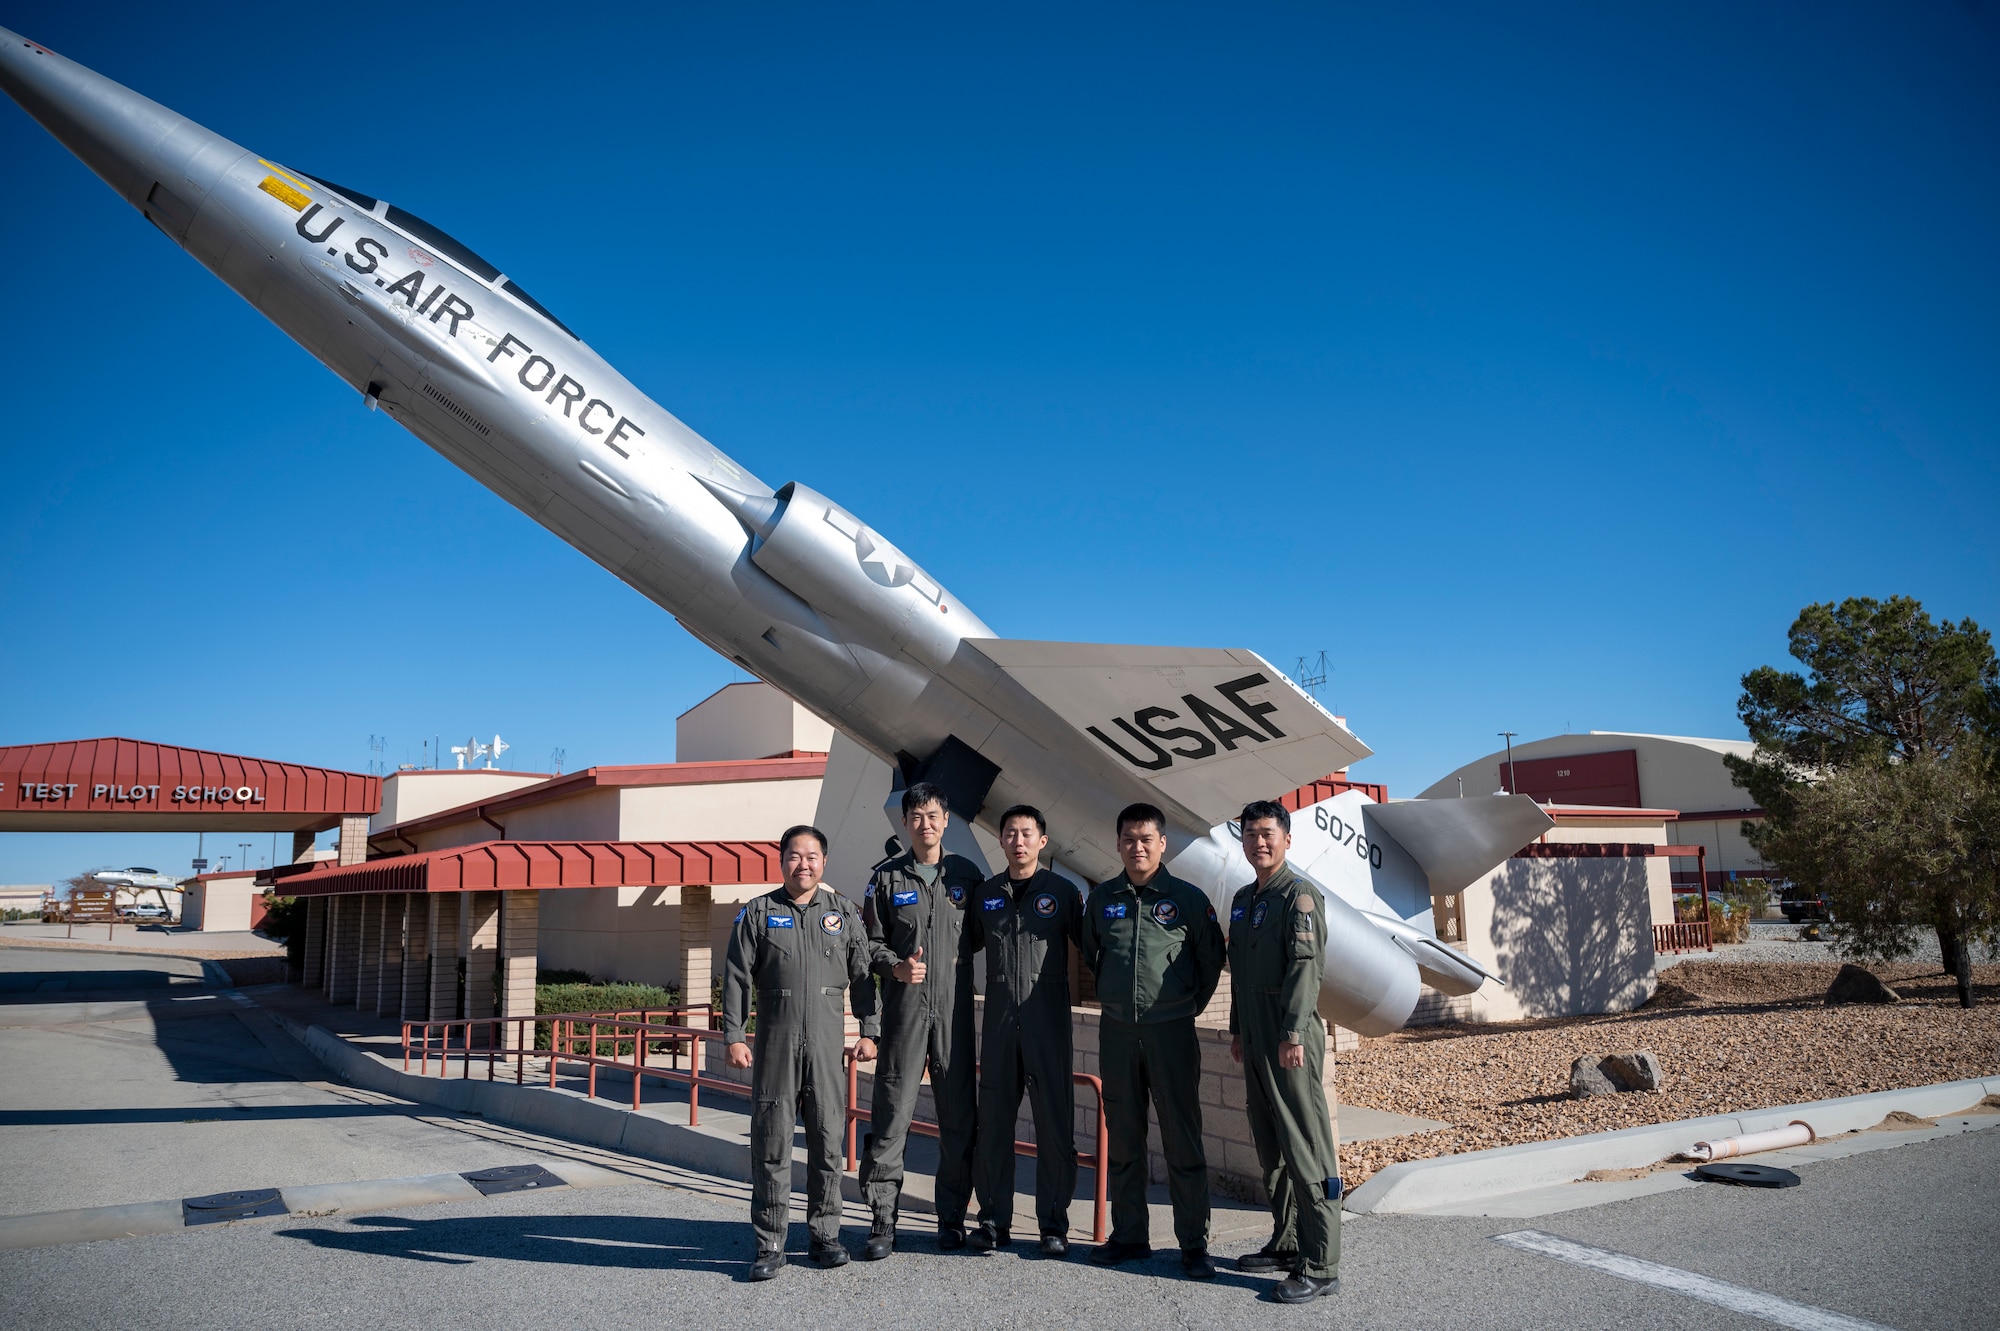 The USAF Test Pilot School (TPS) at Edwards Air Force Base hosted the Republic of Korean Air Force (ROKAF) for a technical exchange, sharing both flight experiences and cultural traditions. The goal is to make the (TPS) students more well-rounded flight test professionals by exposure to different aircraft, control rooms, test centers, and test facilities.